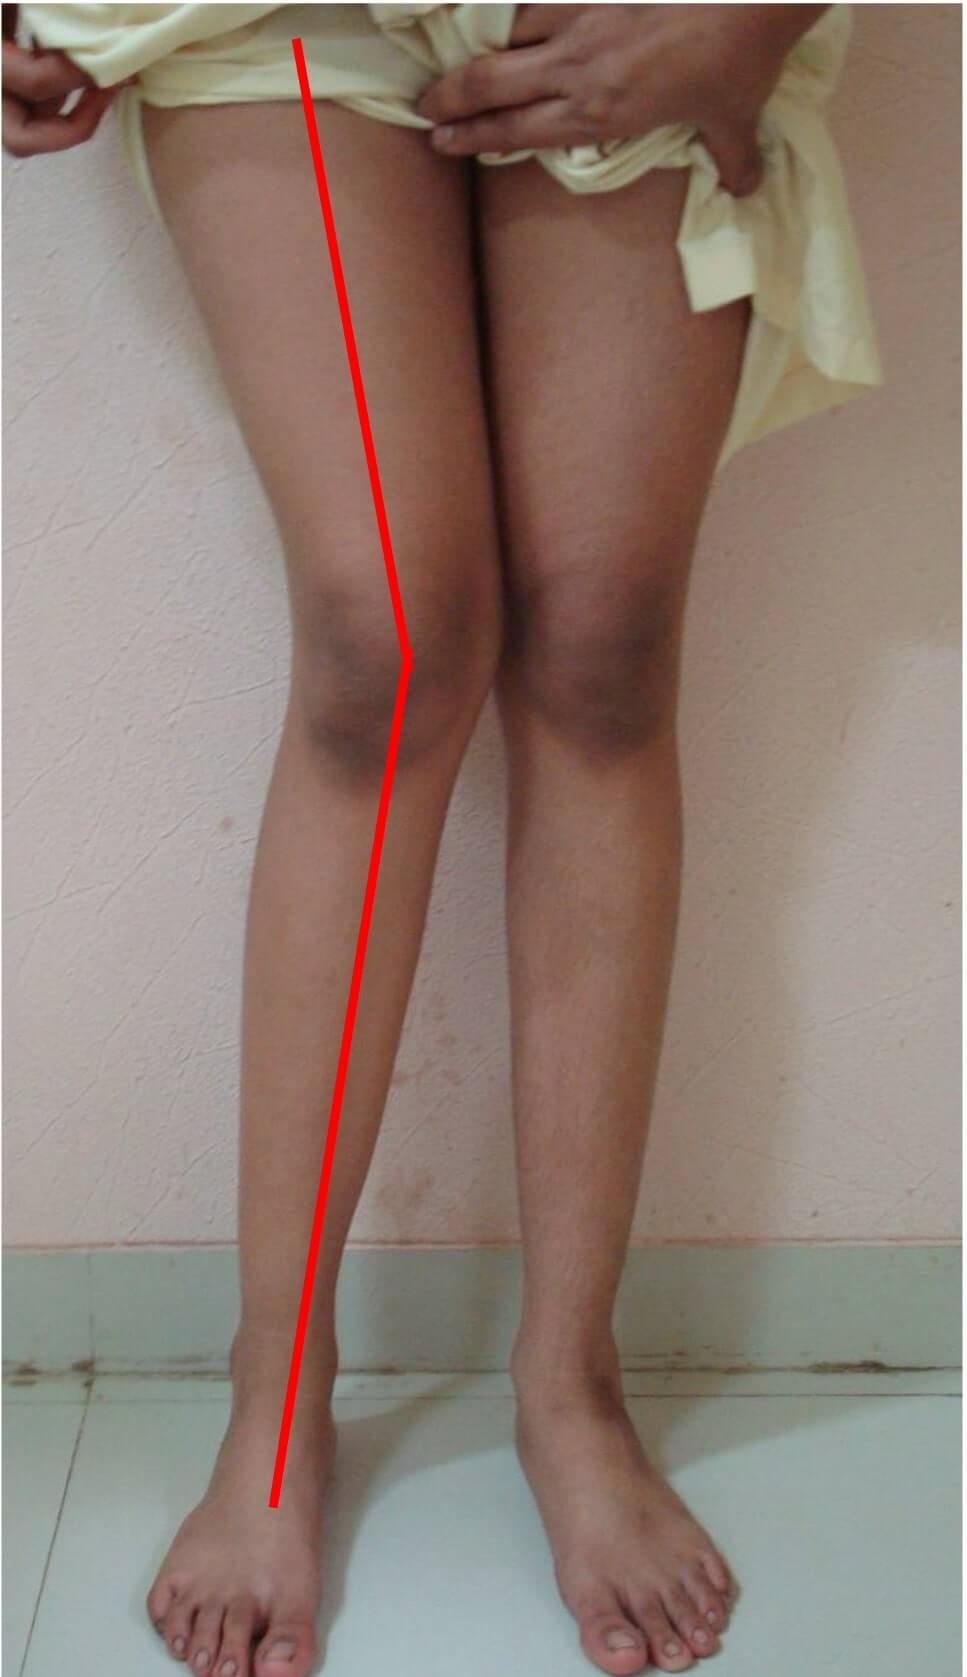 osteotomy surgery for knock knees